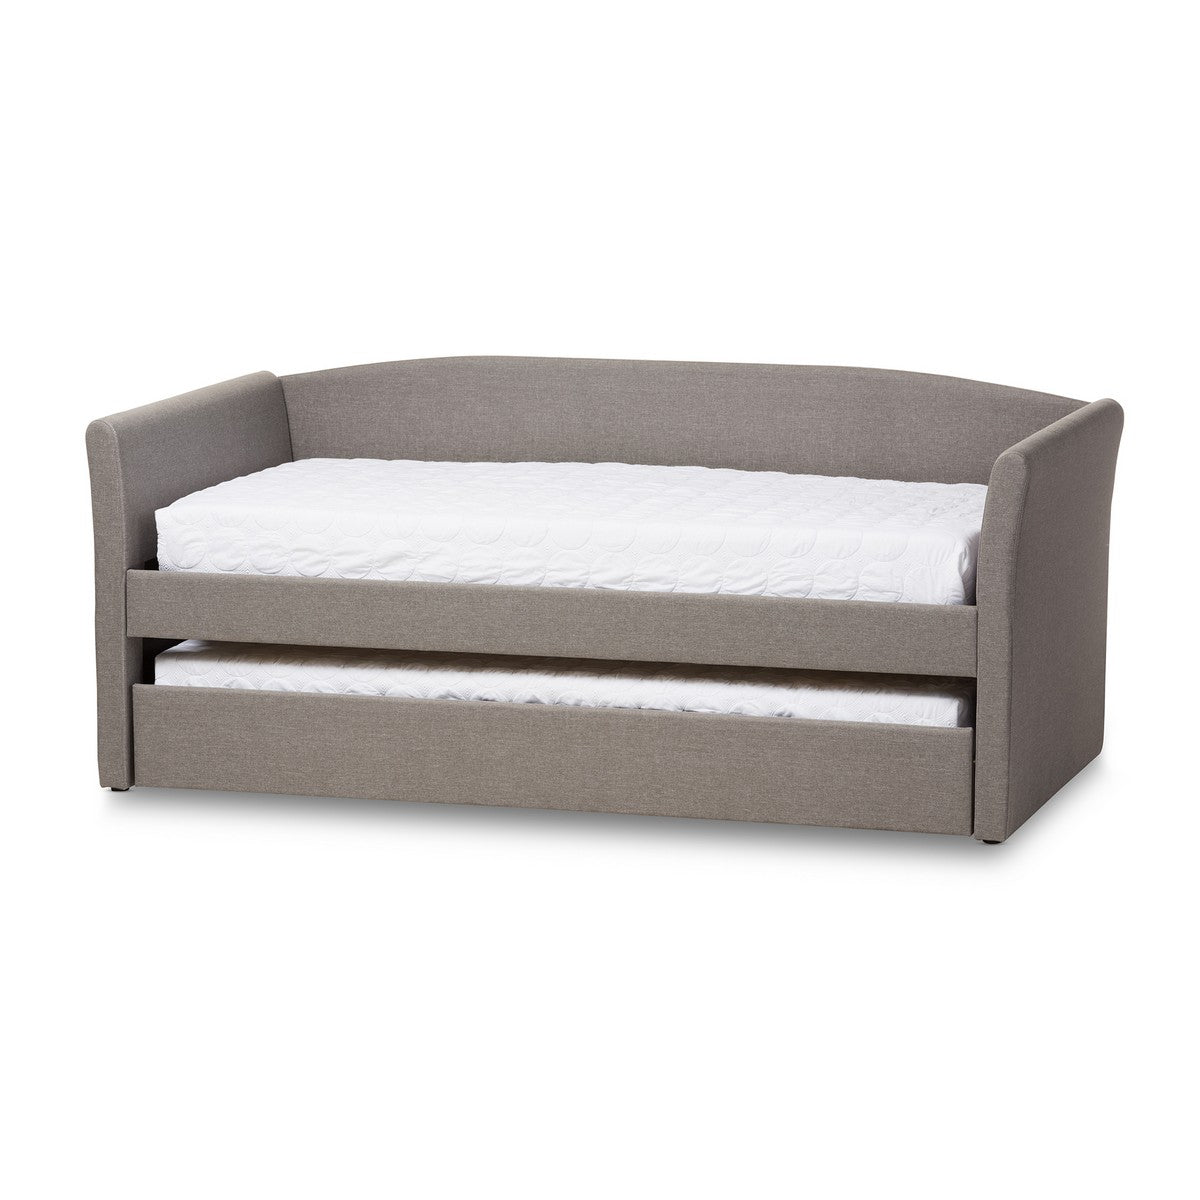 Baxton Studio Camino Modern and Contemporary Grey Fabric Upholstered Daybed with Guest Trundle Bed Baxton Studio-daybed-Minimal And Modern - 1